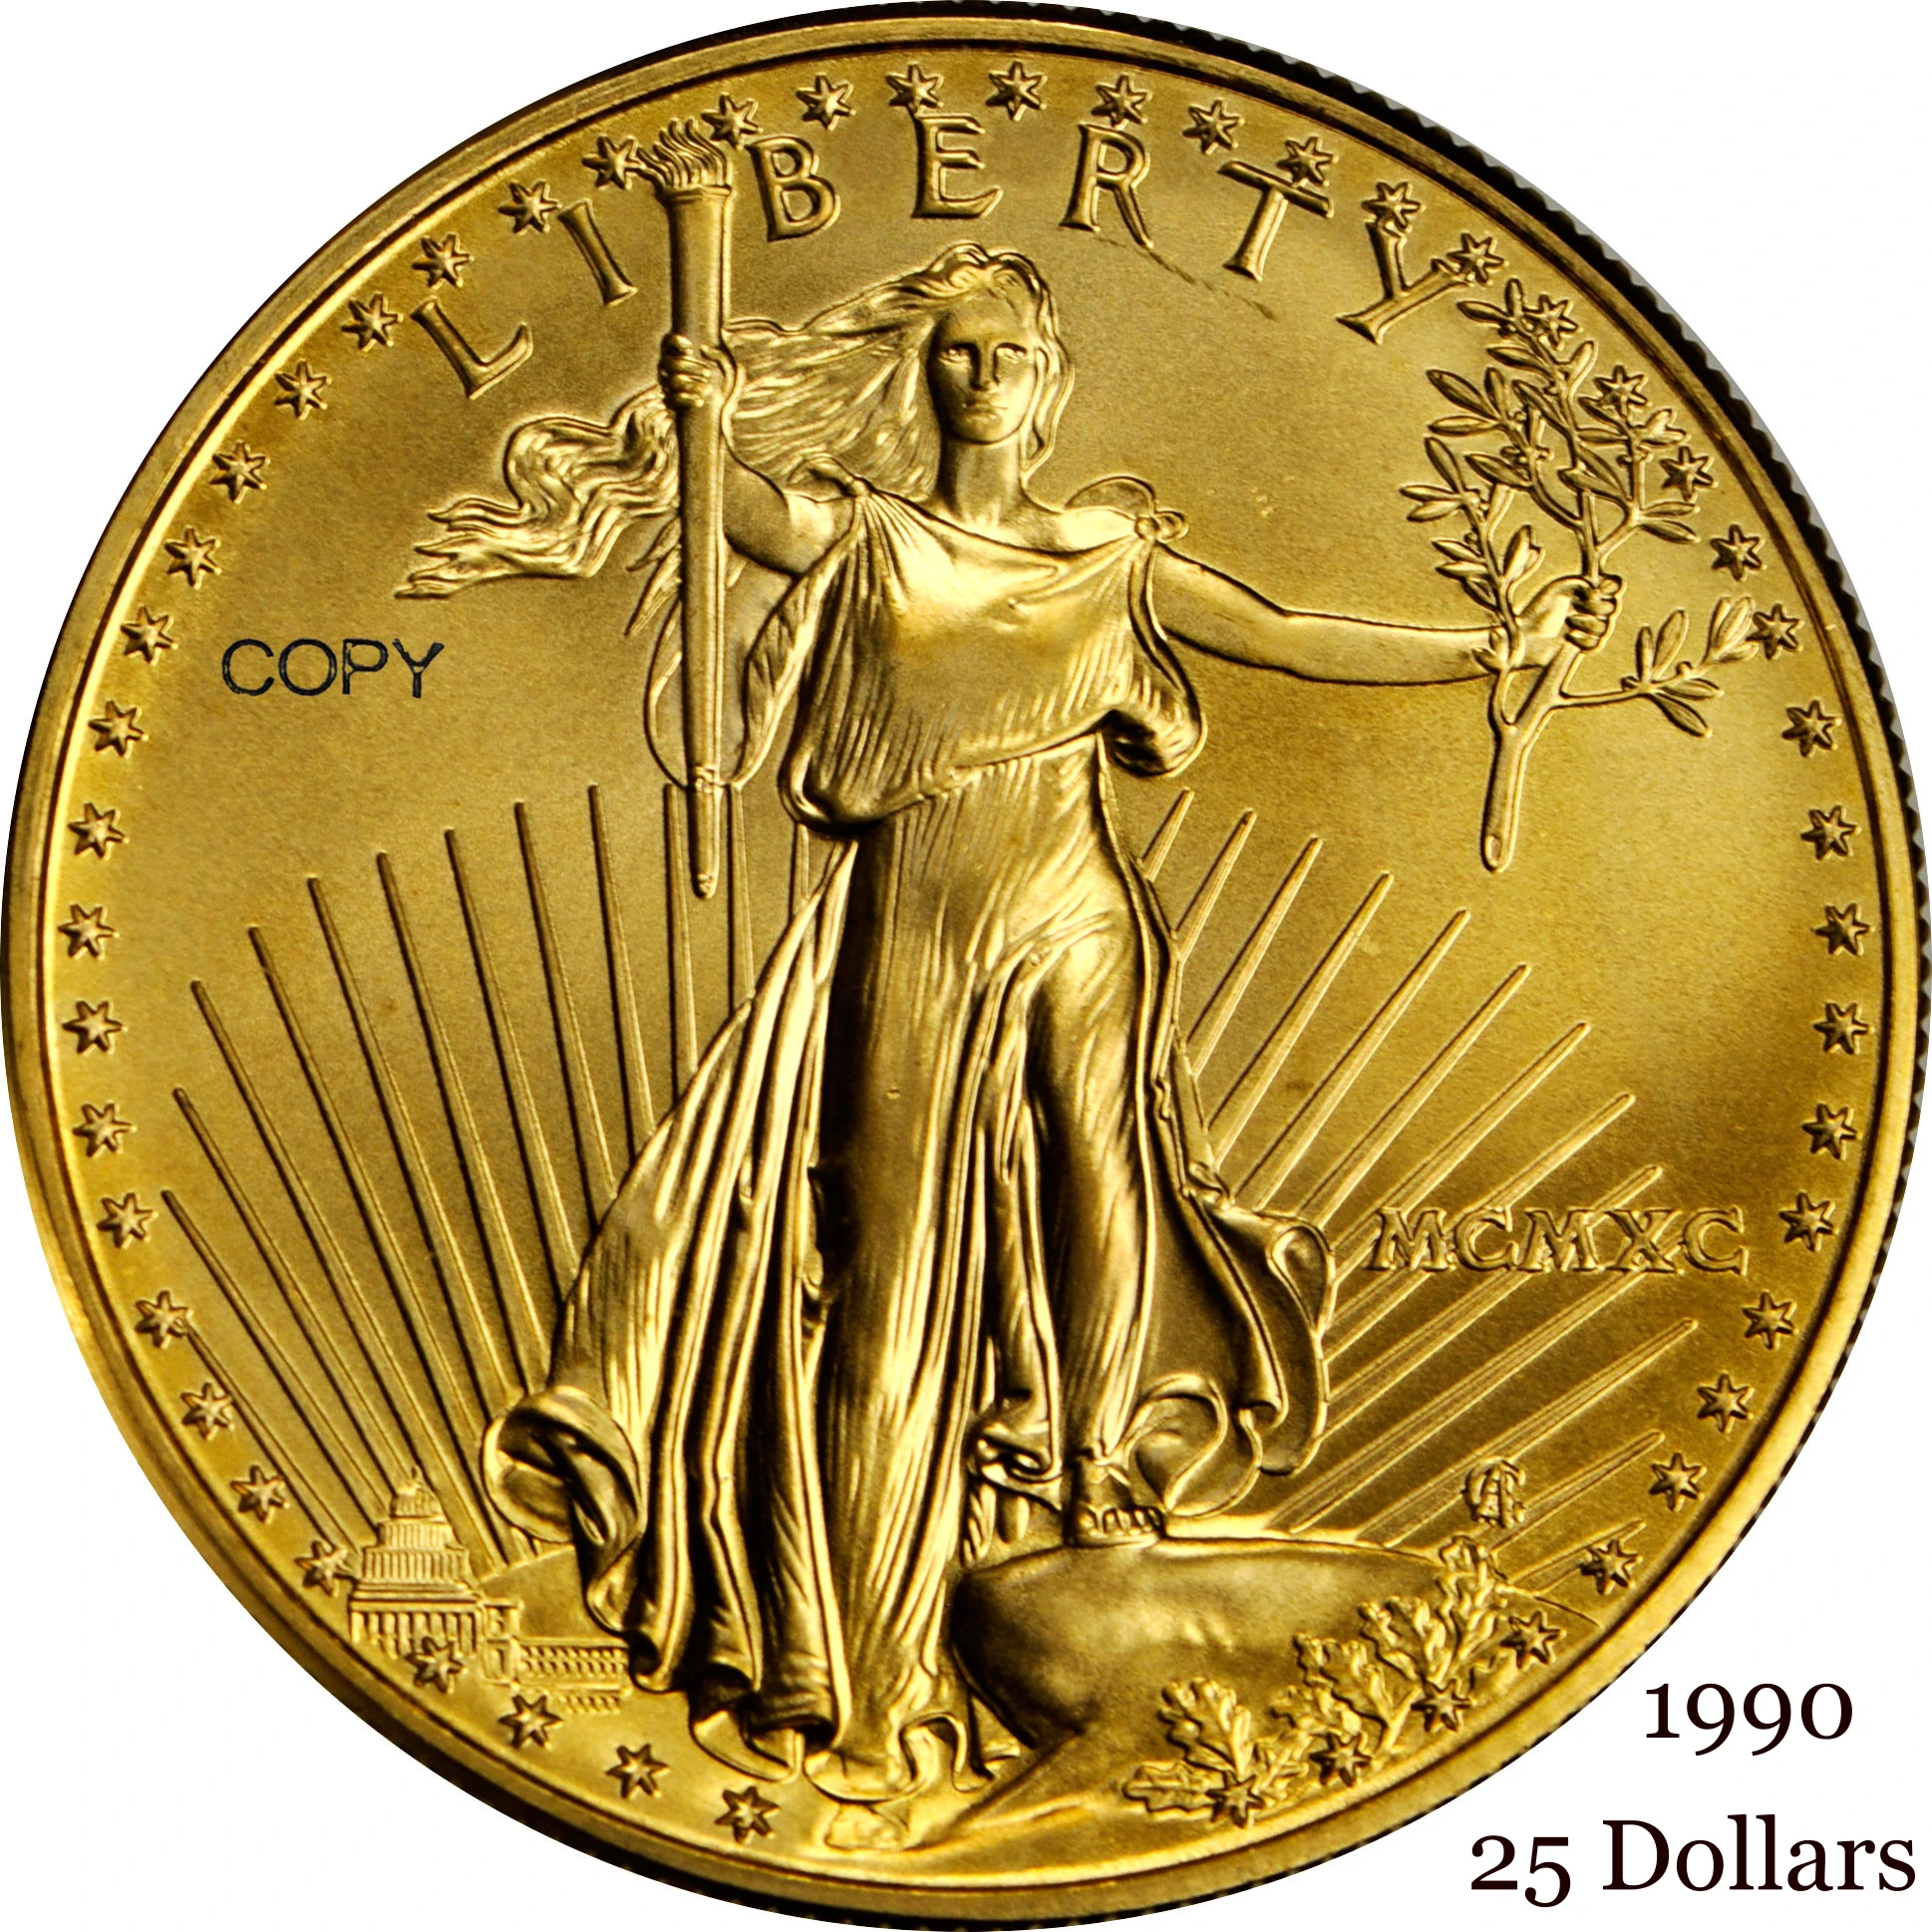 United States US 1990 $25 25 Dollars Half Ounce American Gold Eagle Bullion Coinage USA Liberty Gold Brass Metal Copy Coin